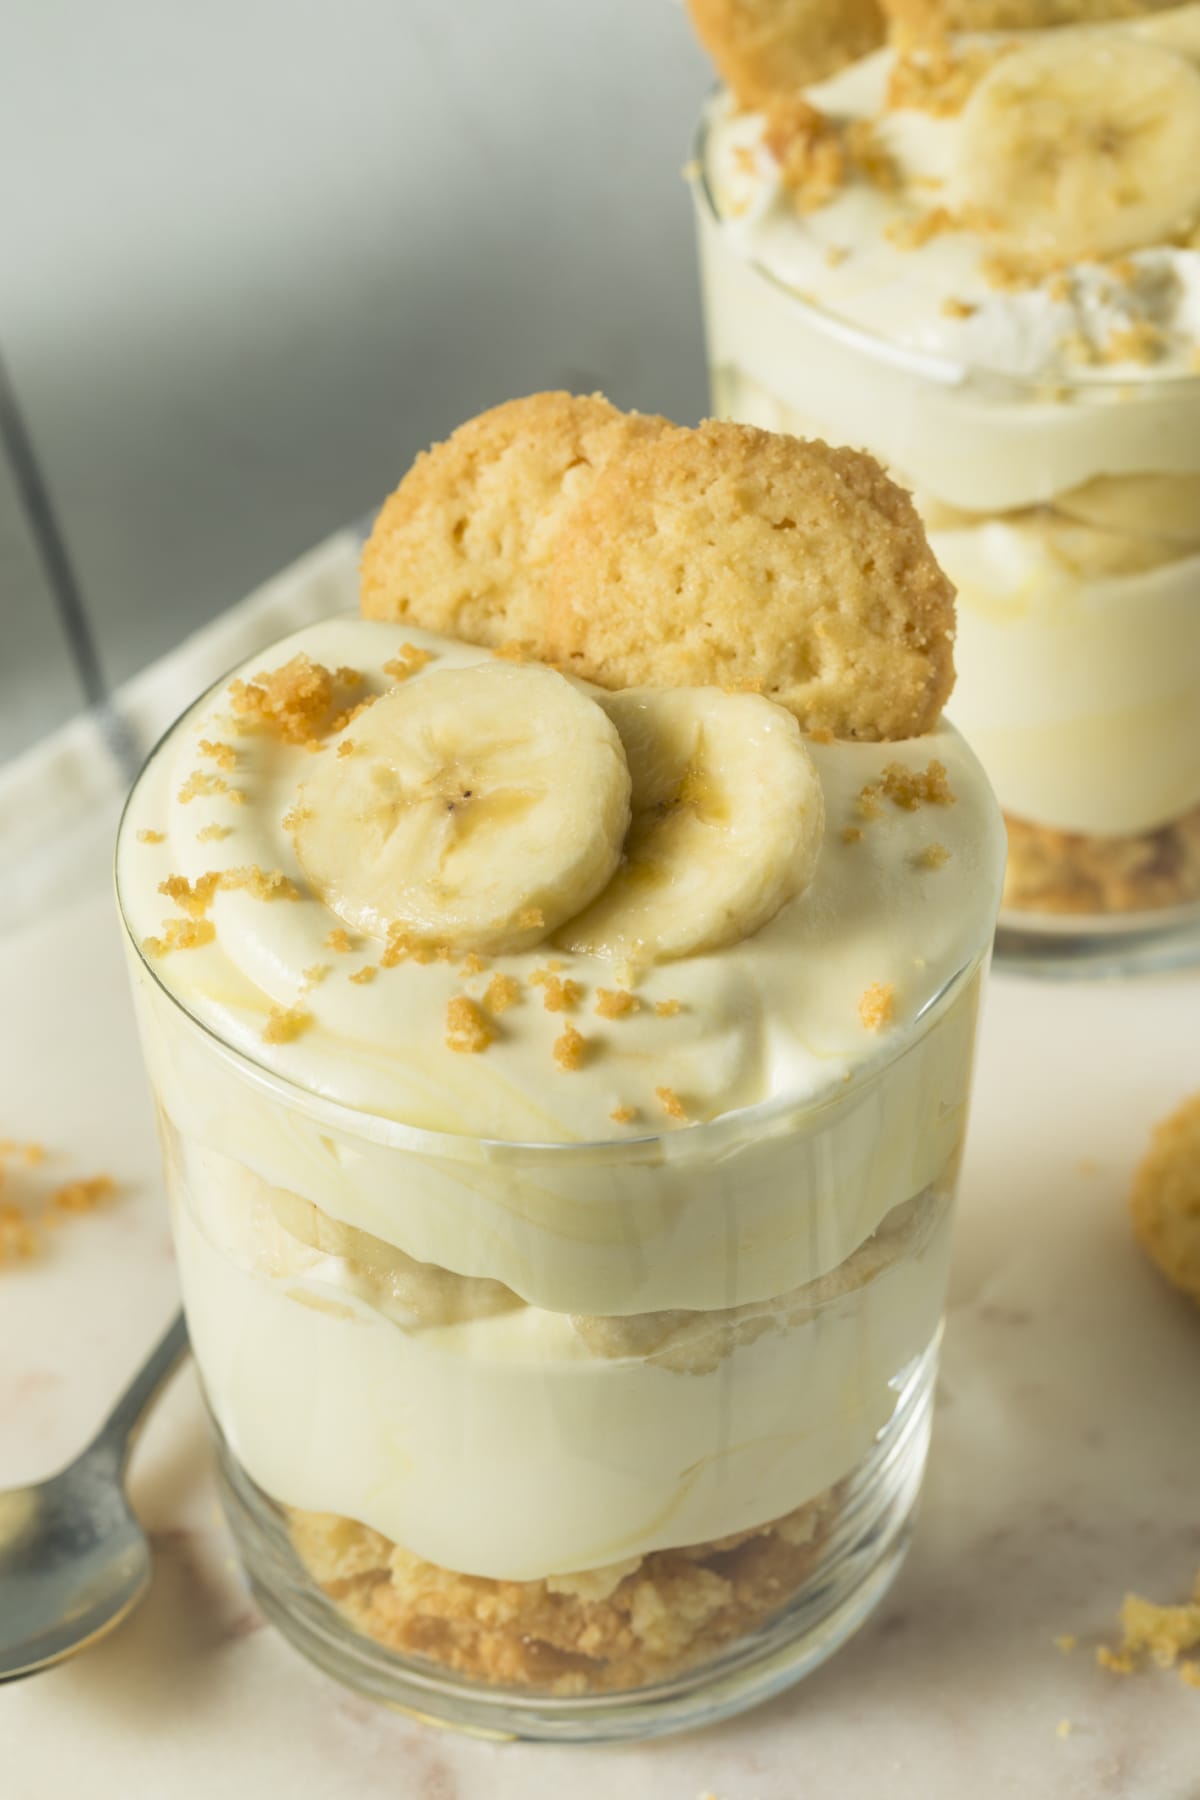 Sweet homemade banana pudding with vanilla wafers in glass